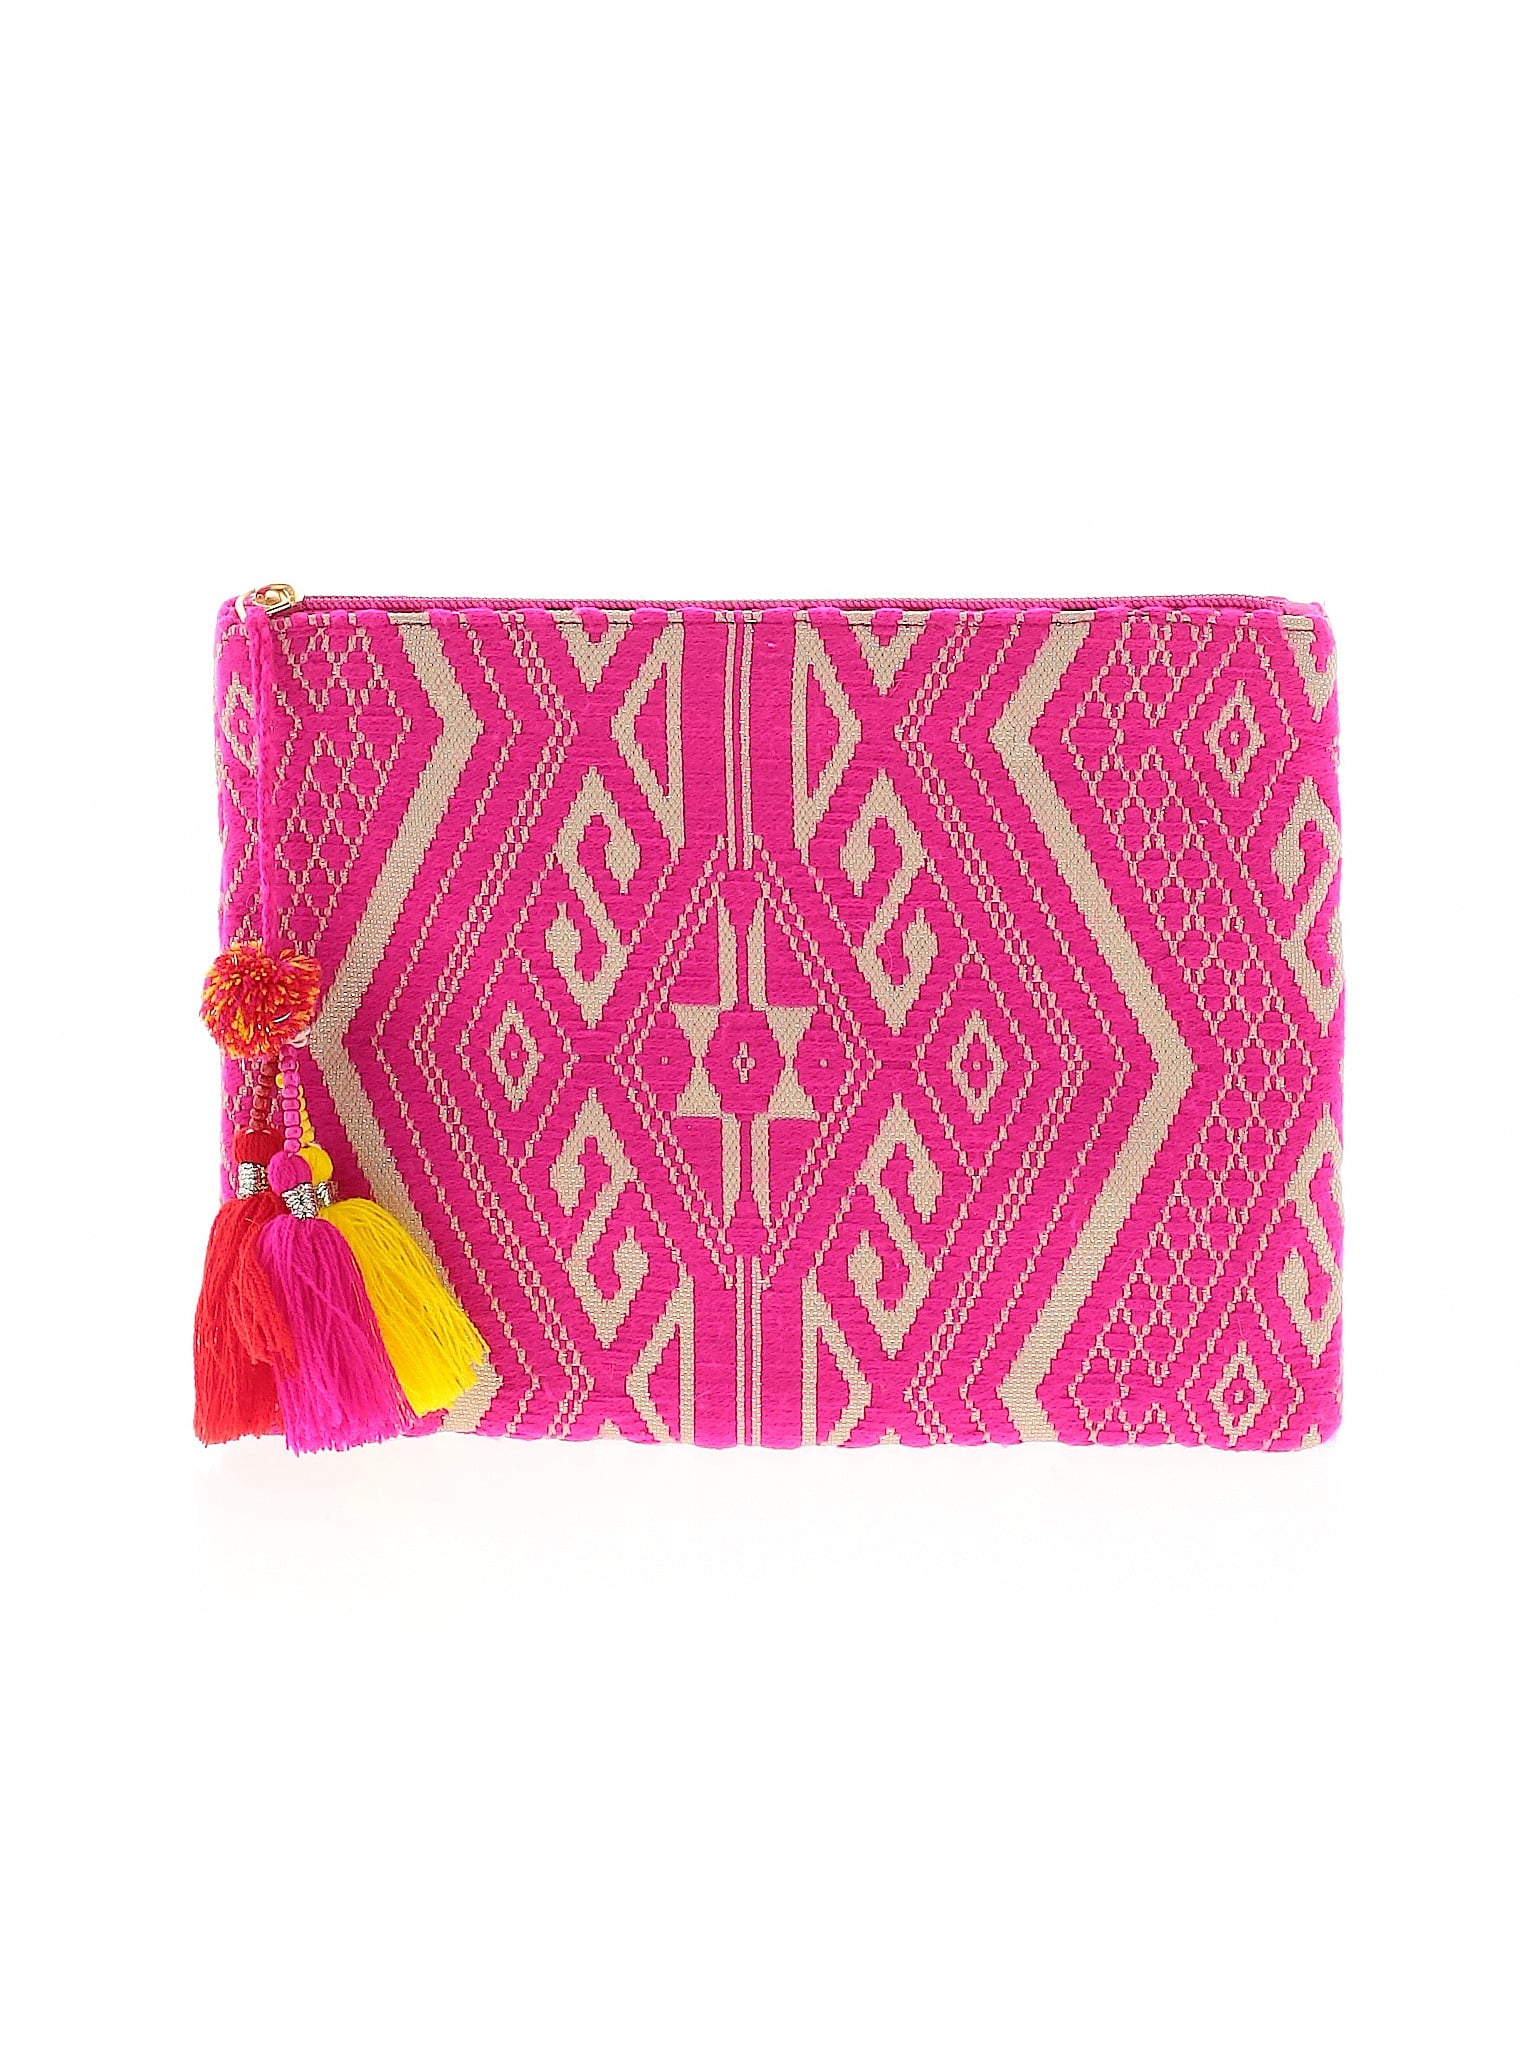 hot pink clutch forever 21